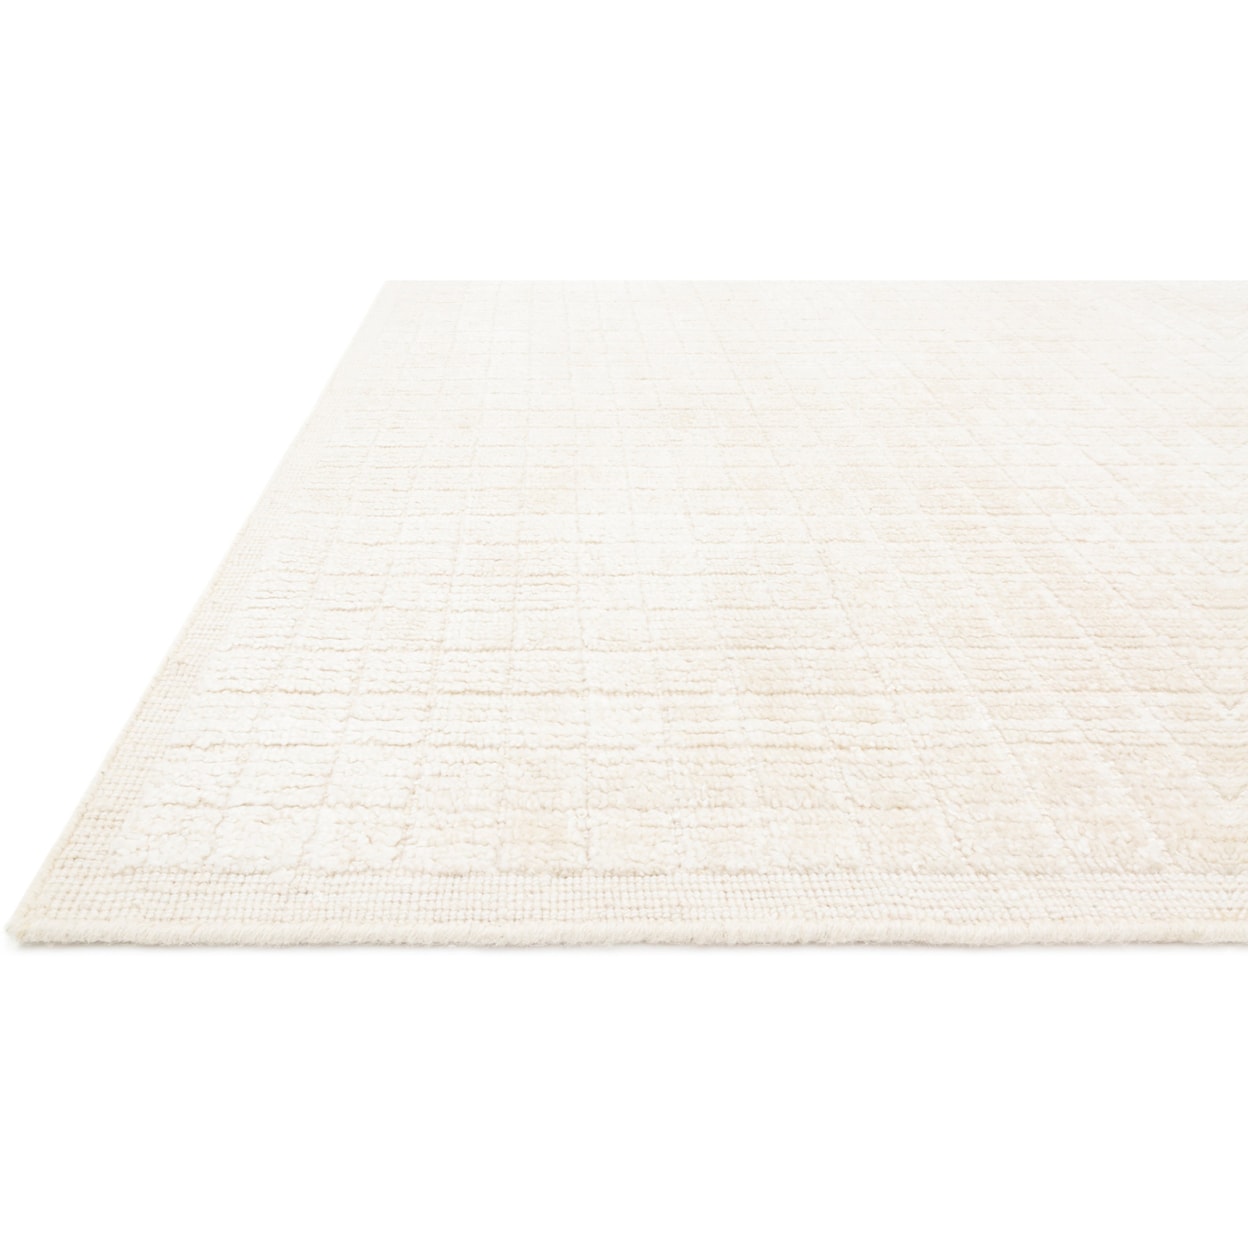 Reeds Rugs Beverly 7'9" x 9'9" Ivory Rug